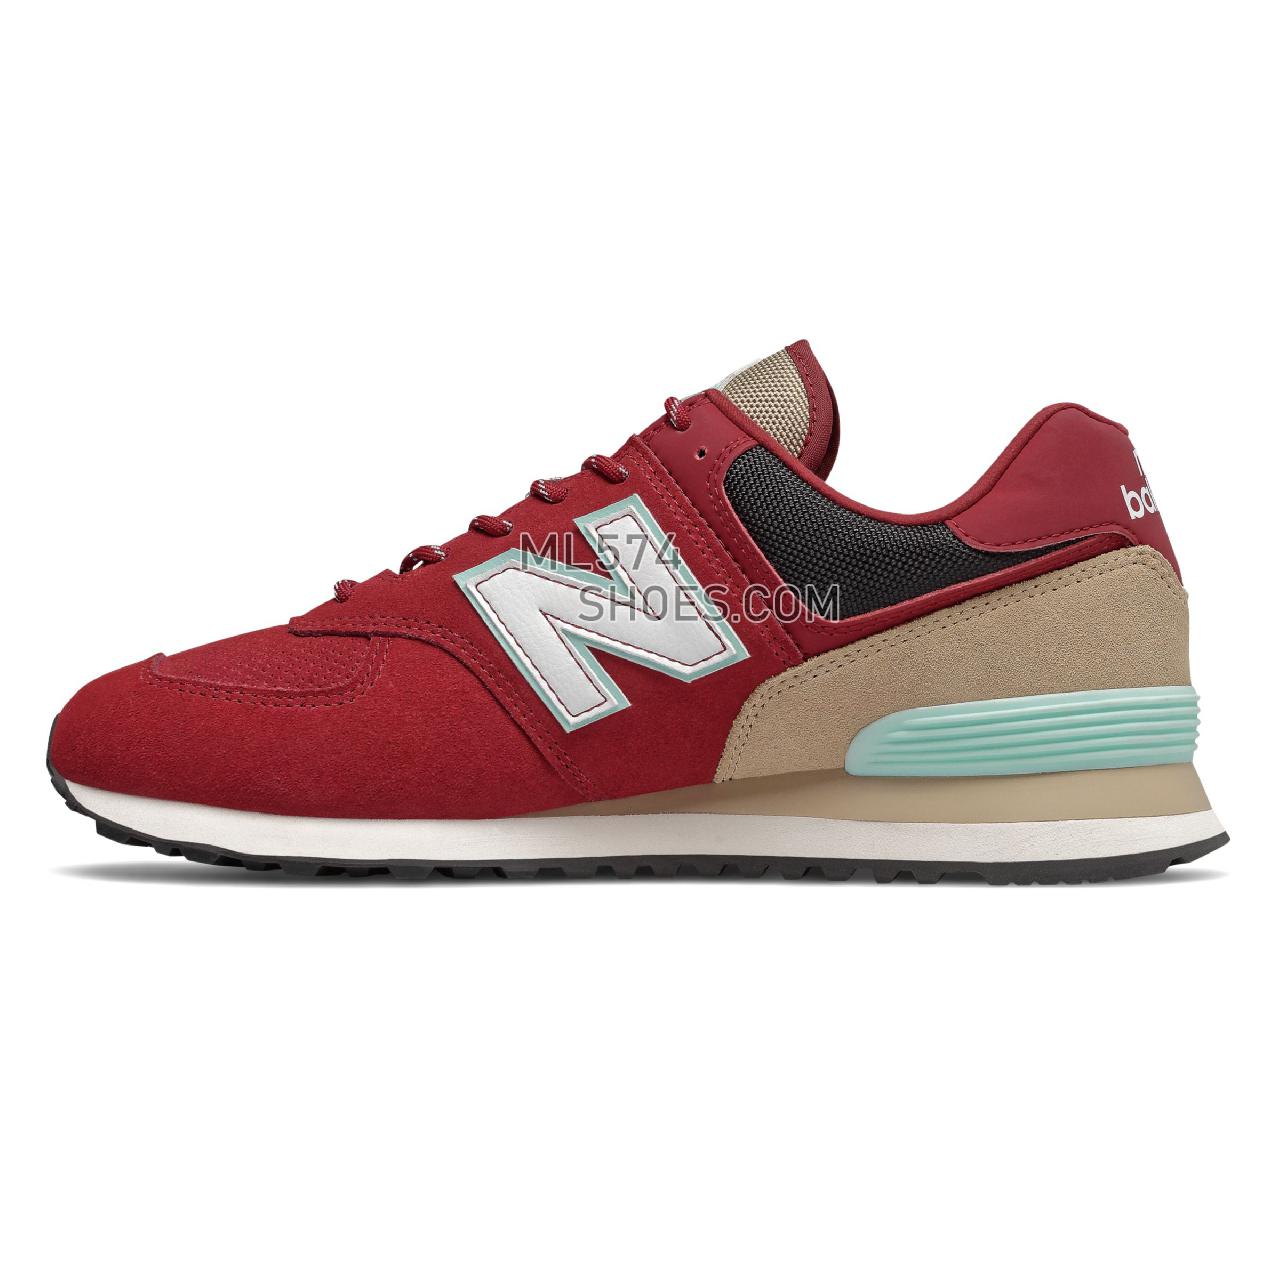 New Balance 574 - Men's Classic Sneakers - Team Red with Light Reef - ML574JHQ